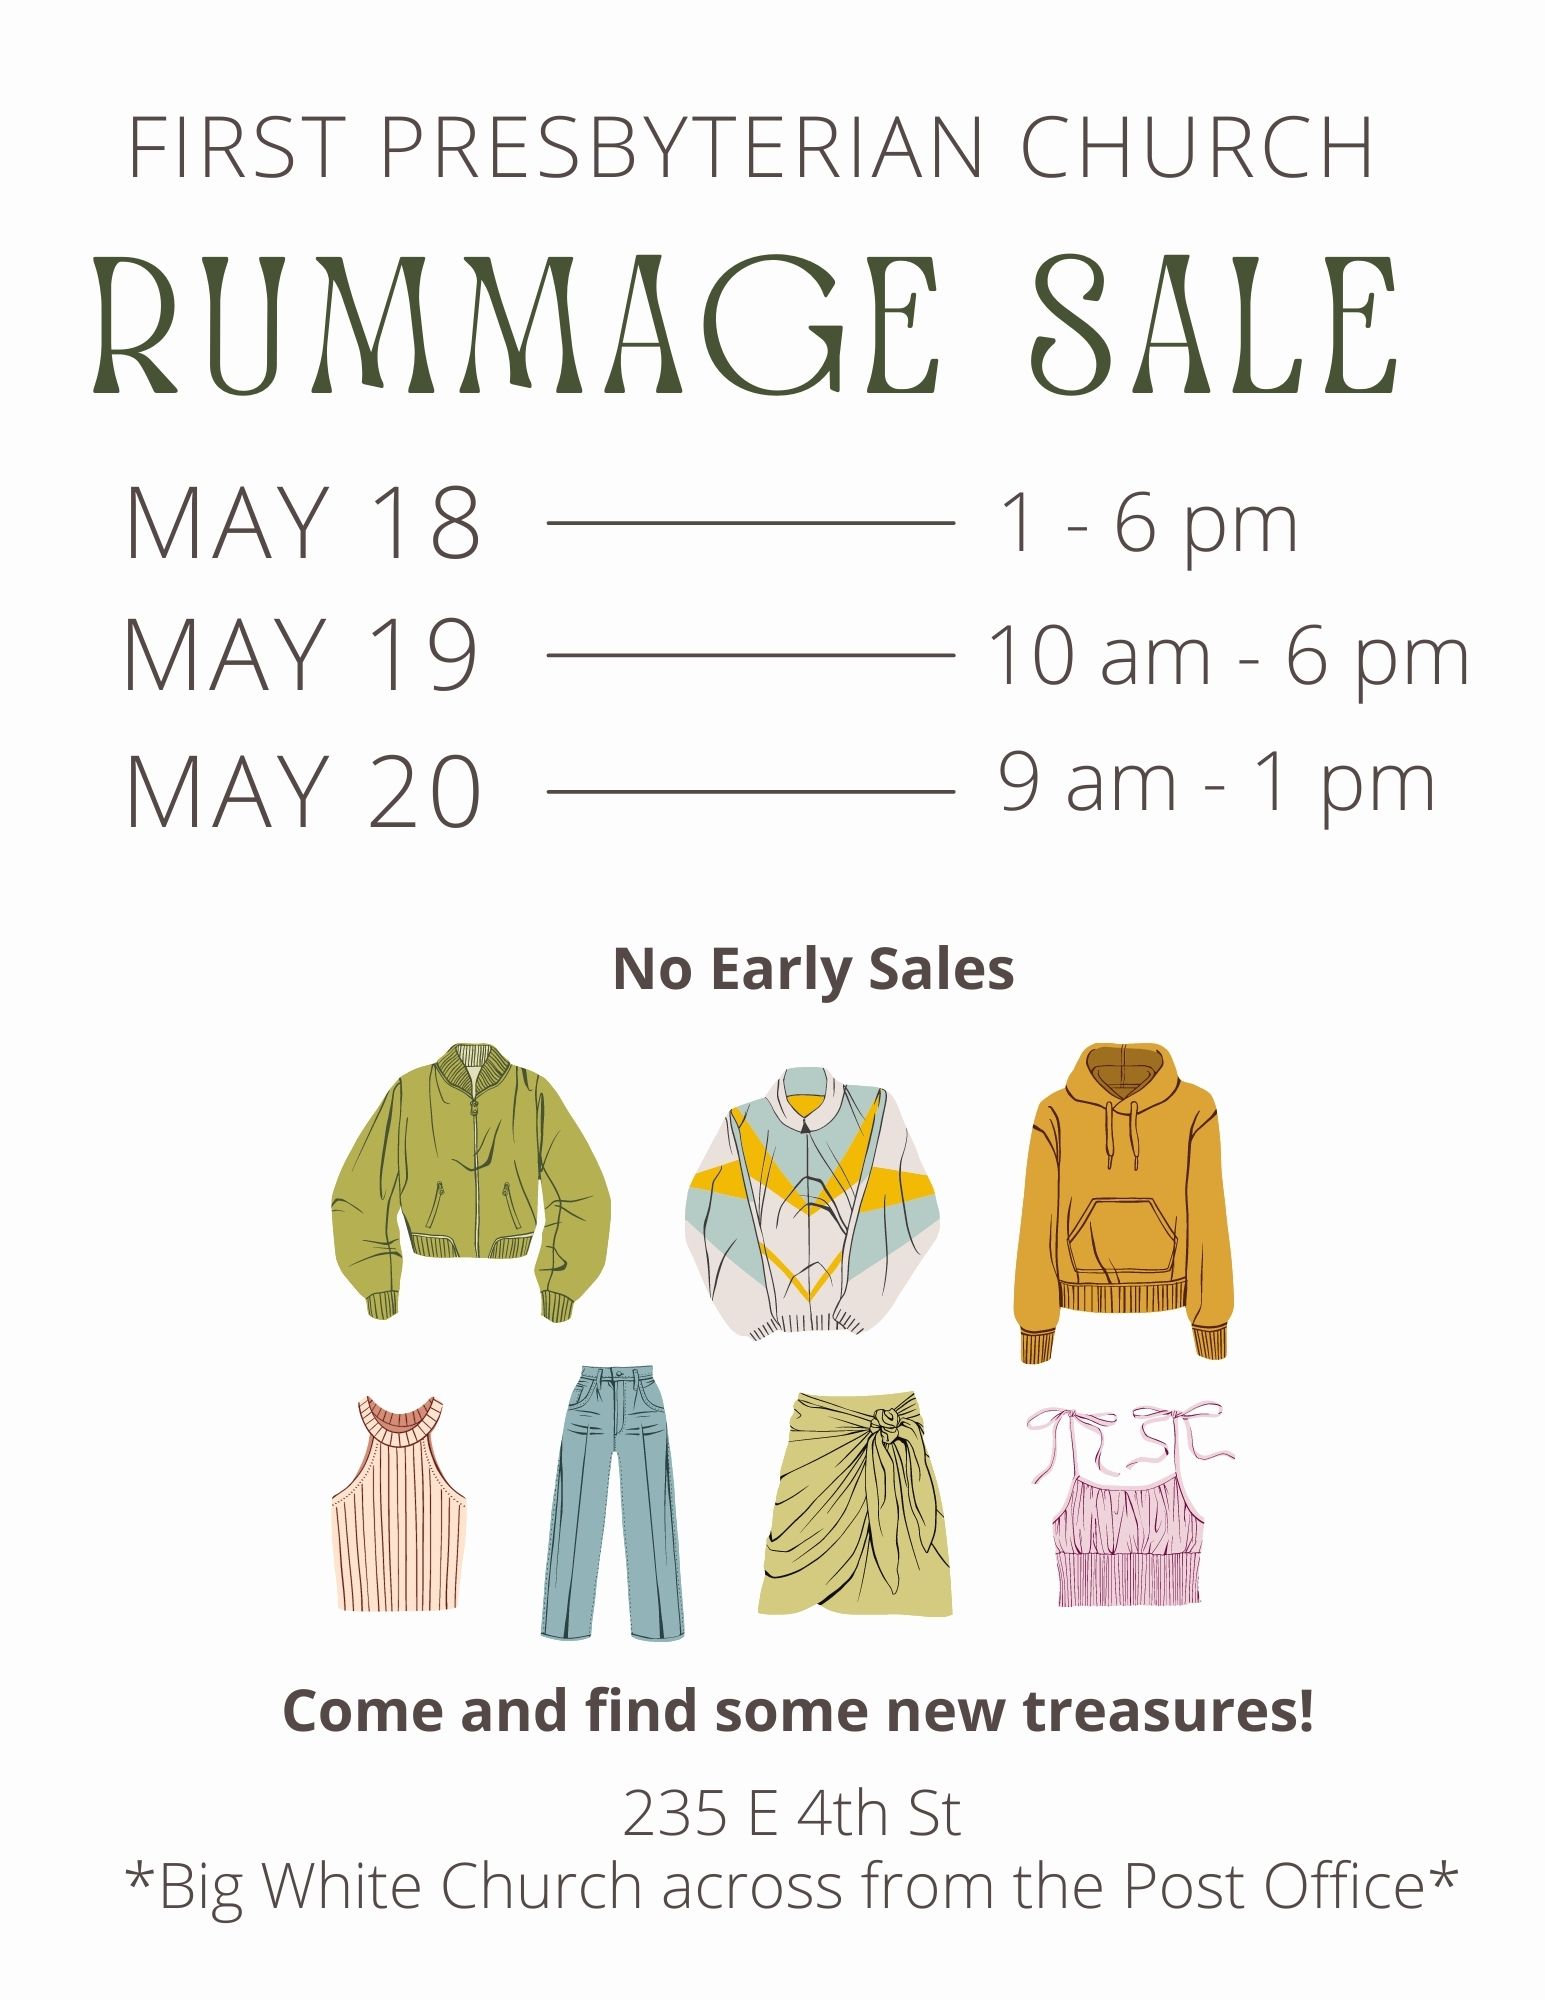 <h1 class="tribe-events-single-event-title">1st Presbyterian Church Rummage Sale</h1>